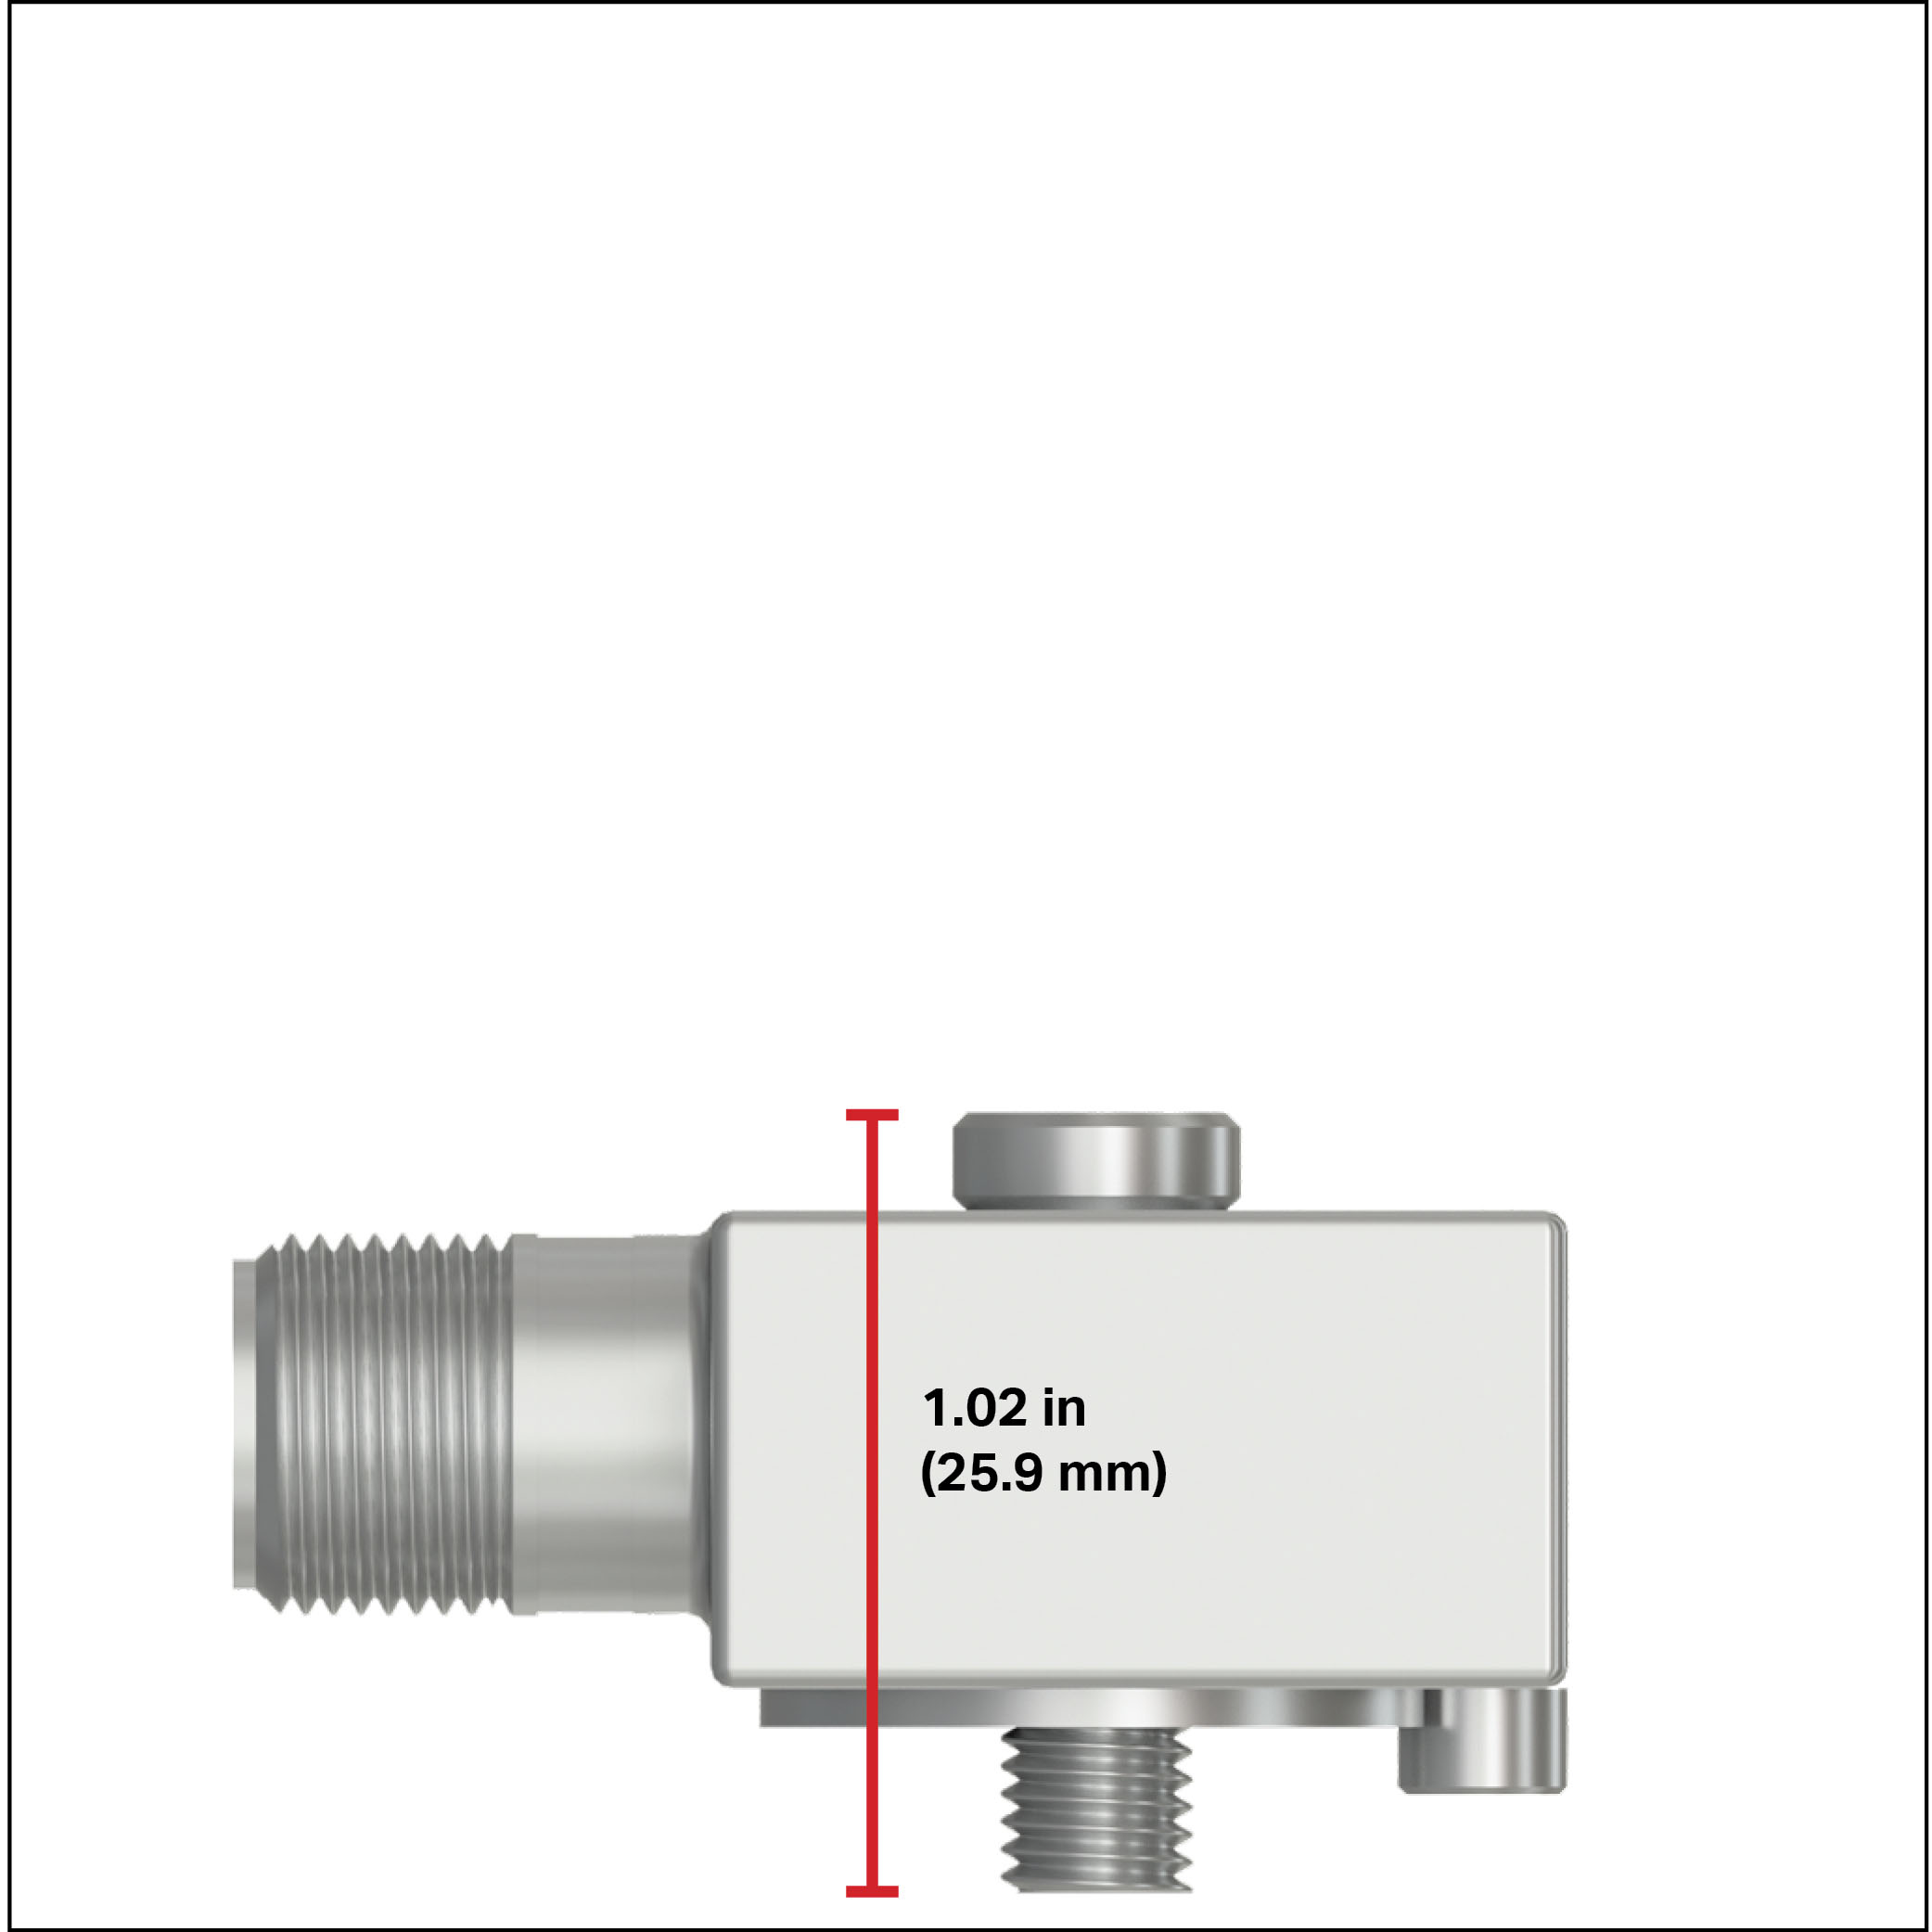 TREA330 Compact Triaxial Sensor with a height of 1.02 in shown.